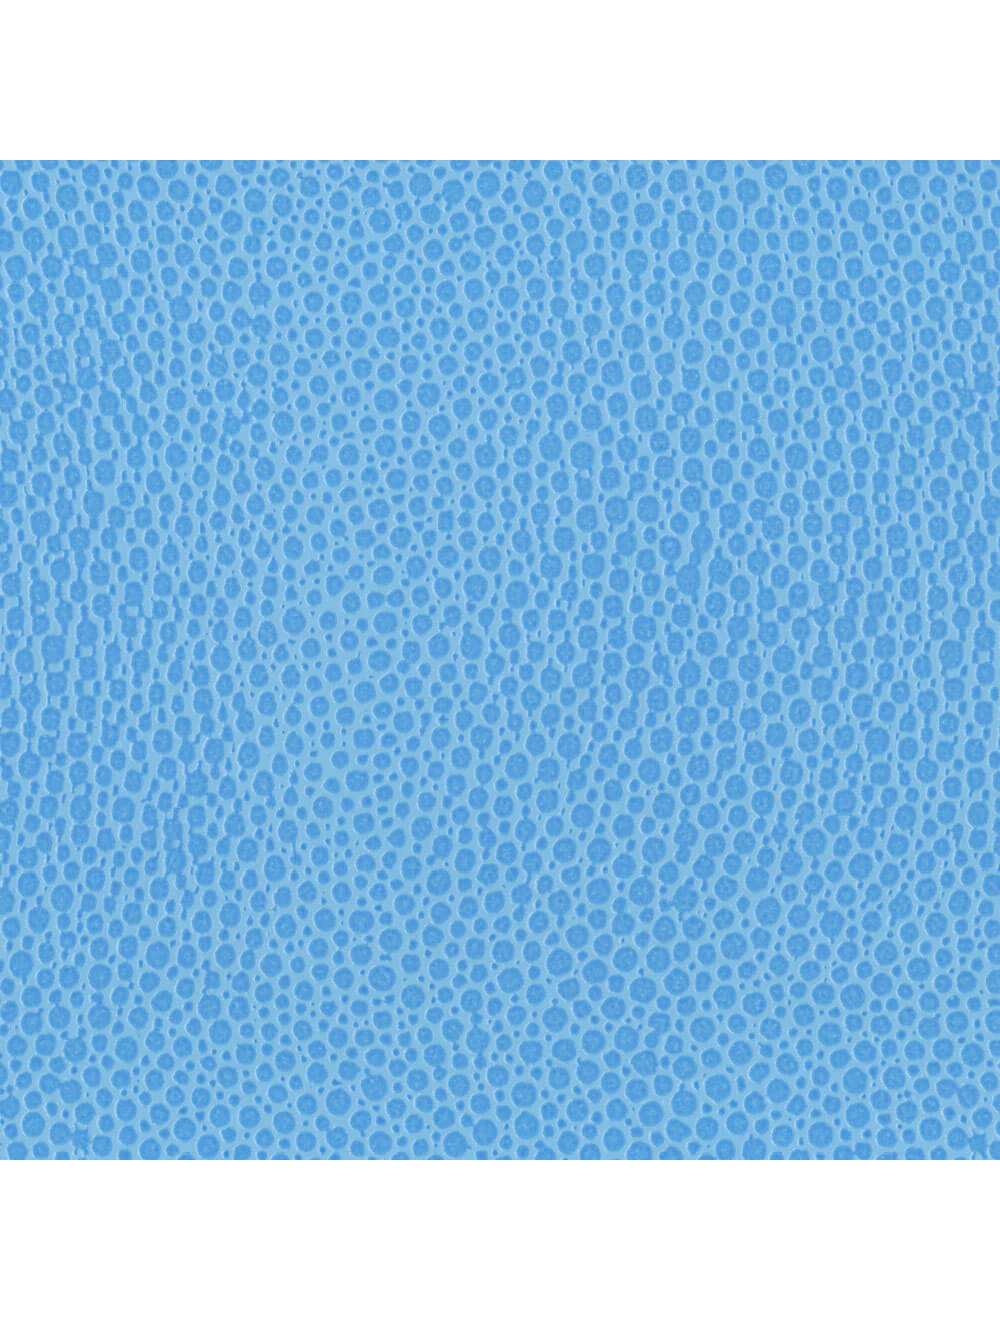 Berlin Mallory Pulver Blue Material Swatch (PEM9218)